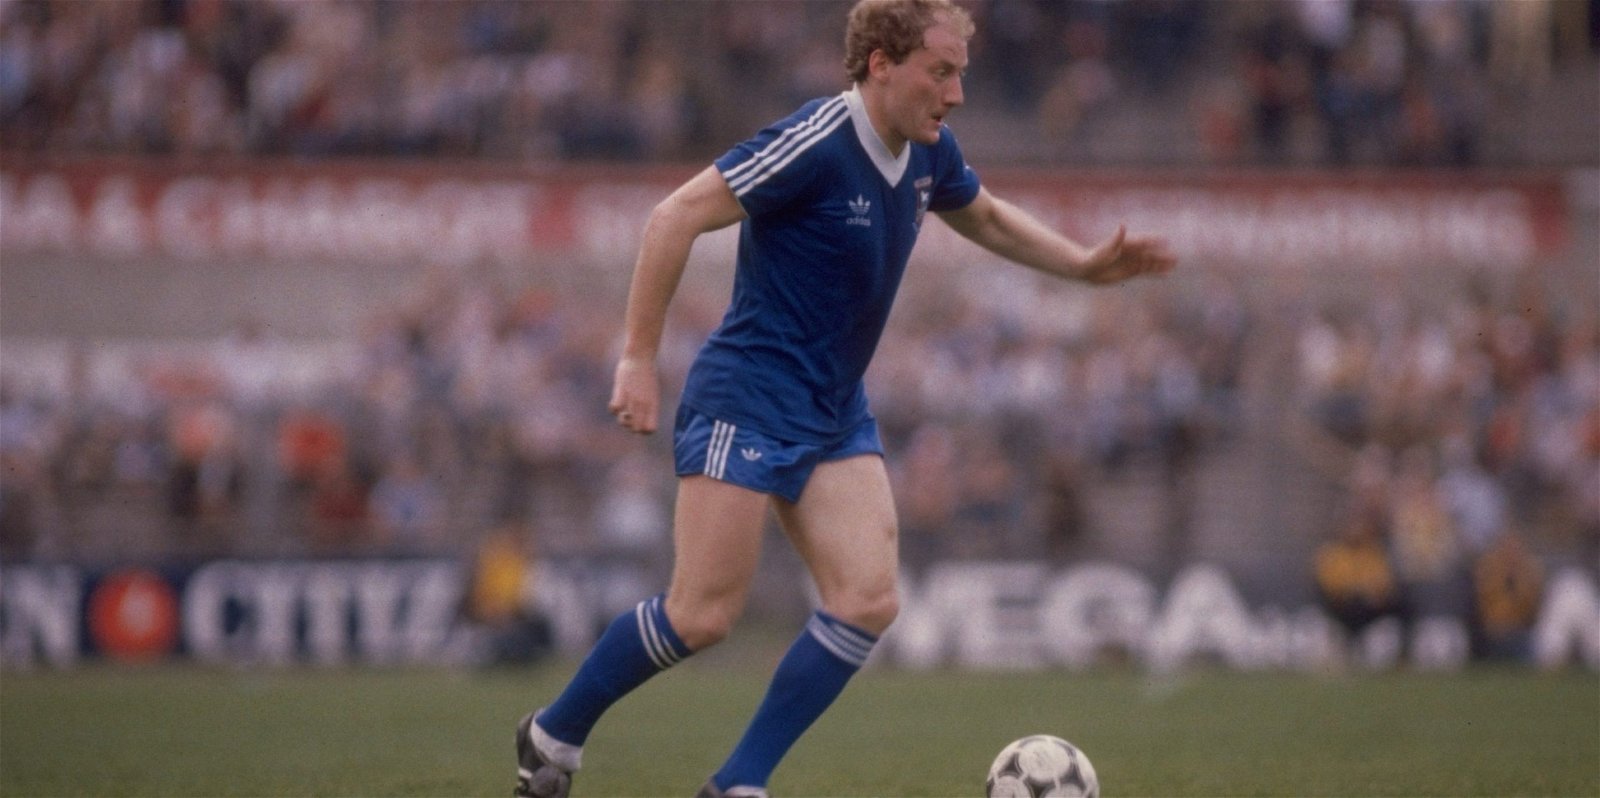 Ipswich Town new kit, Ipswich Town kit launch is a homage to glory days gone by